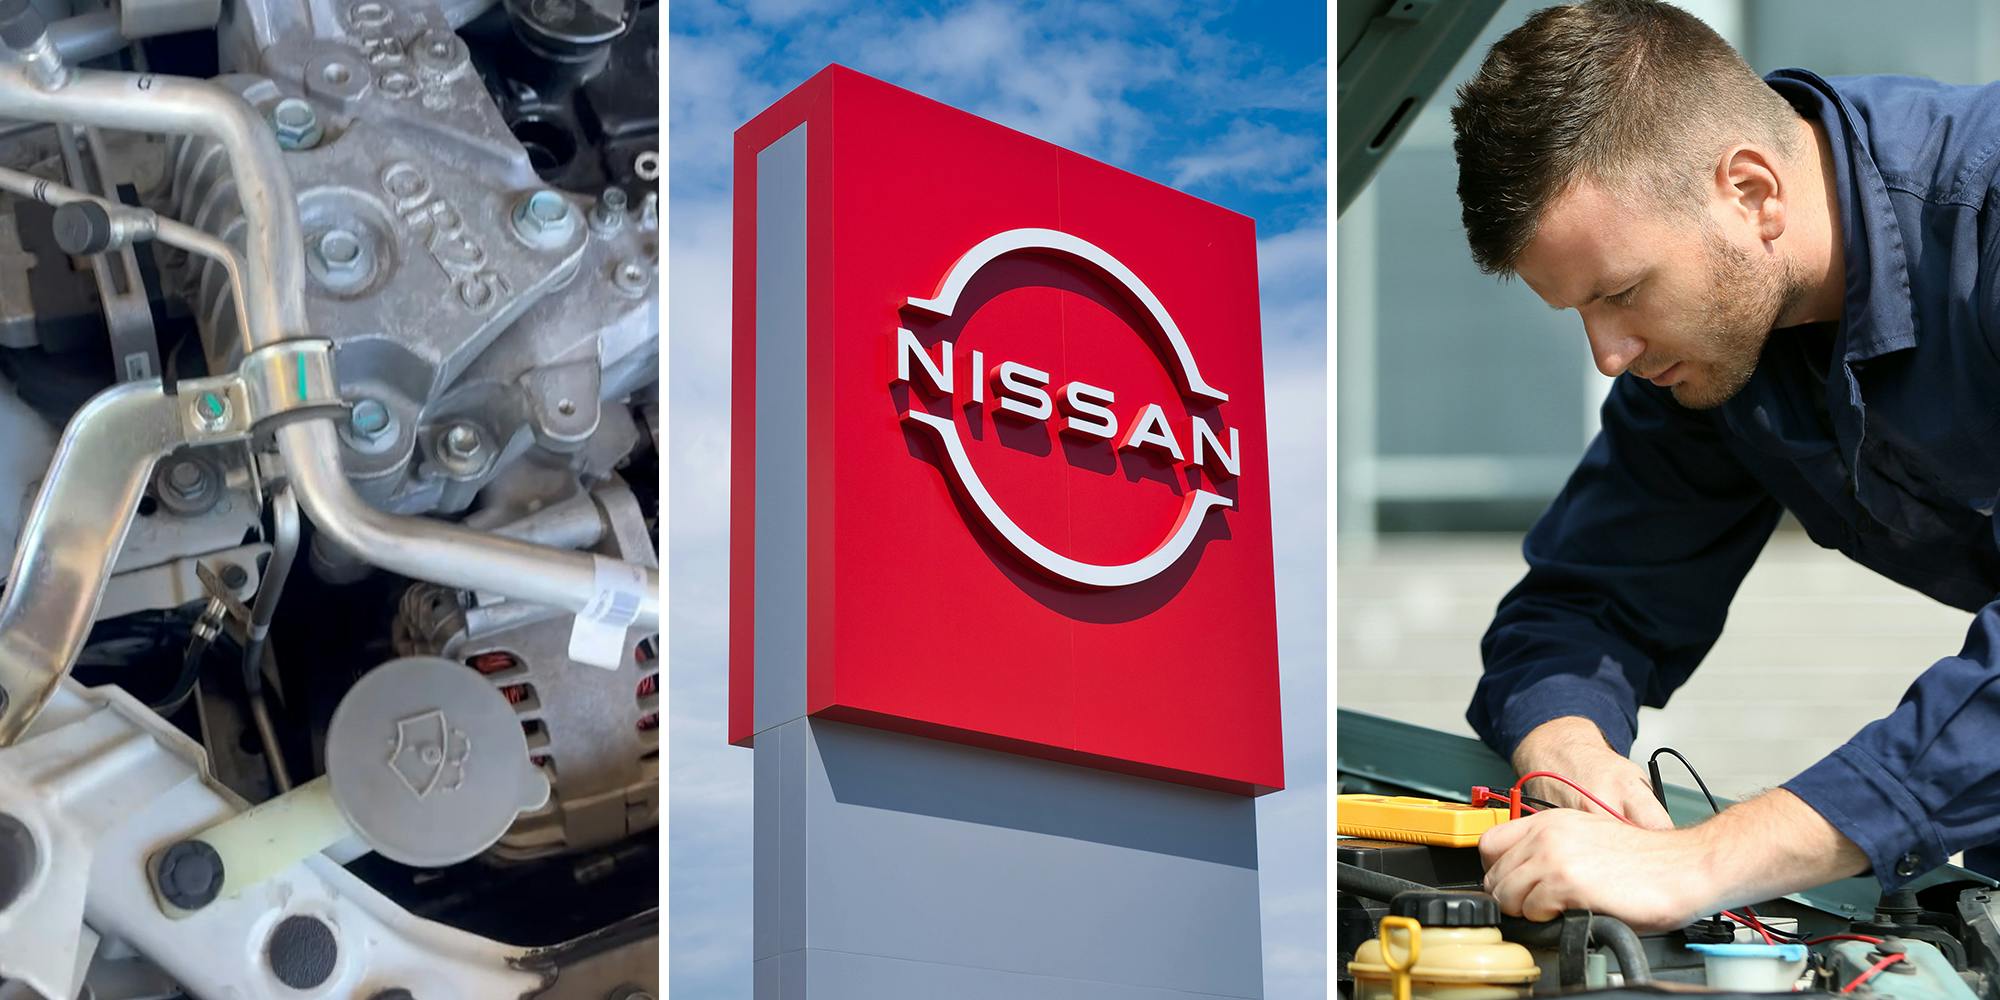 Mechanic issues warning about Nissans after failing to be able to work on one